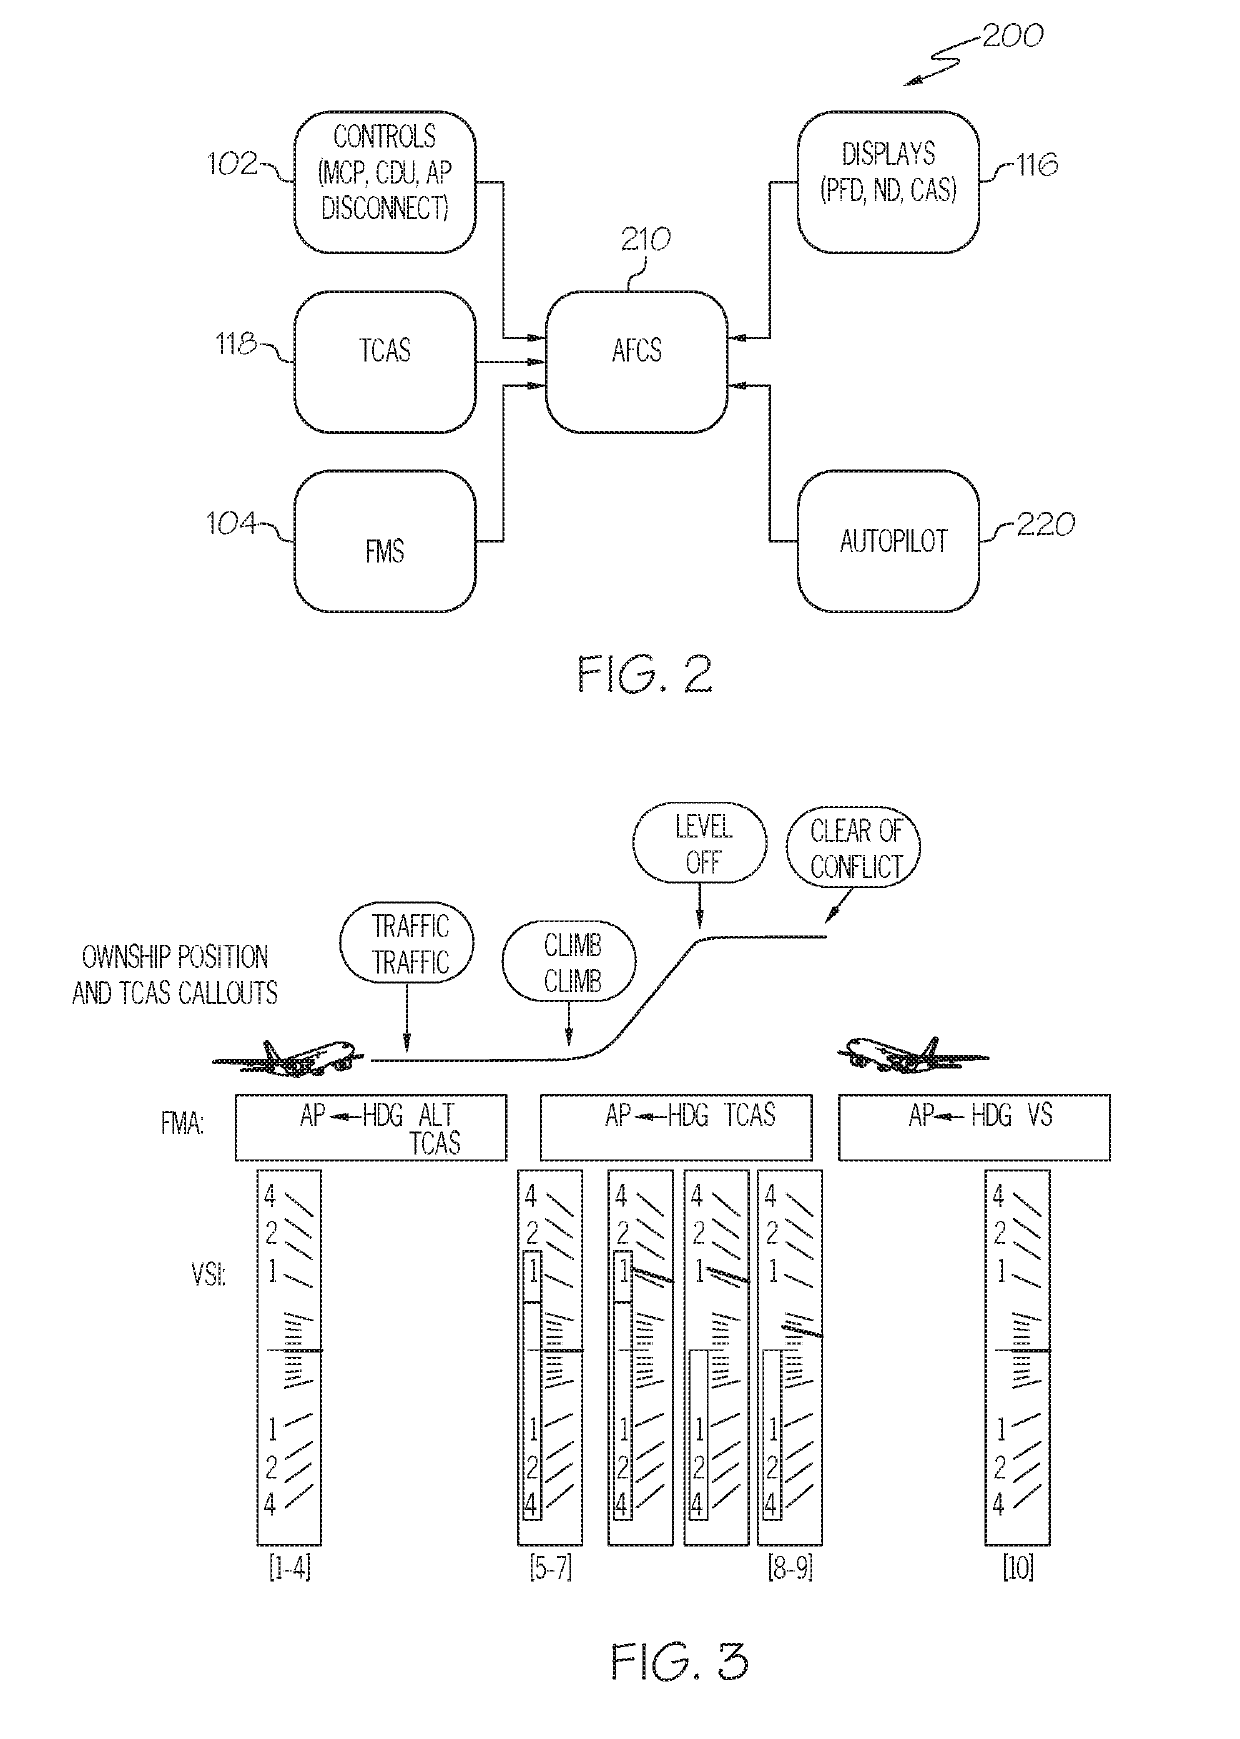 Aircraft traffic alert and collision avoidance system with autoflight system mode protection